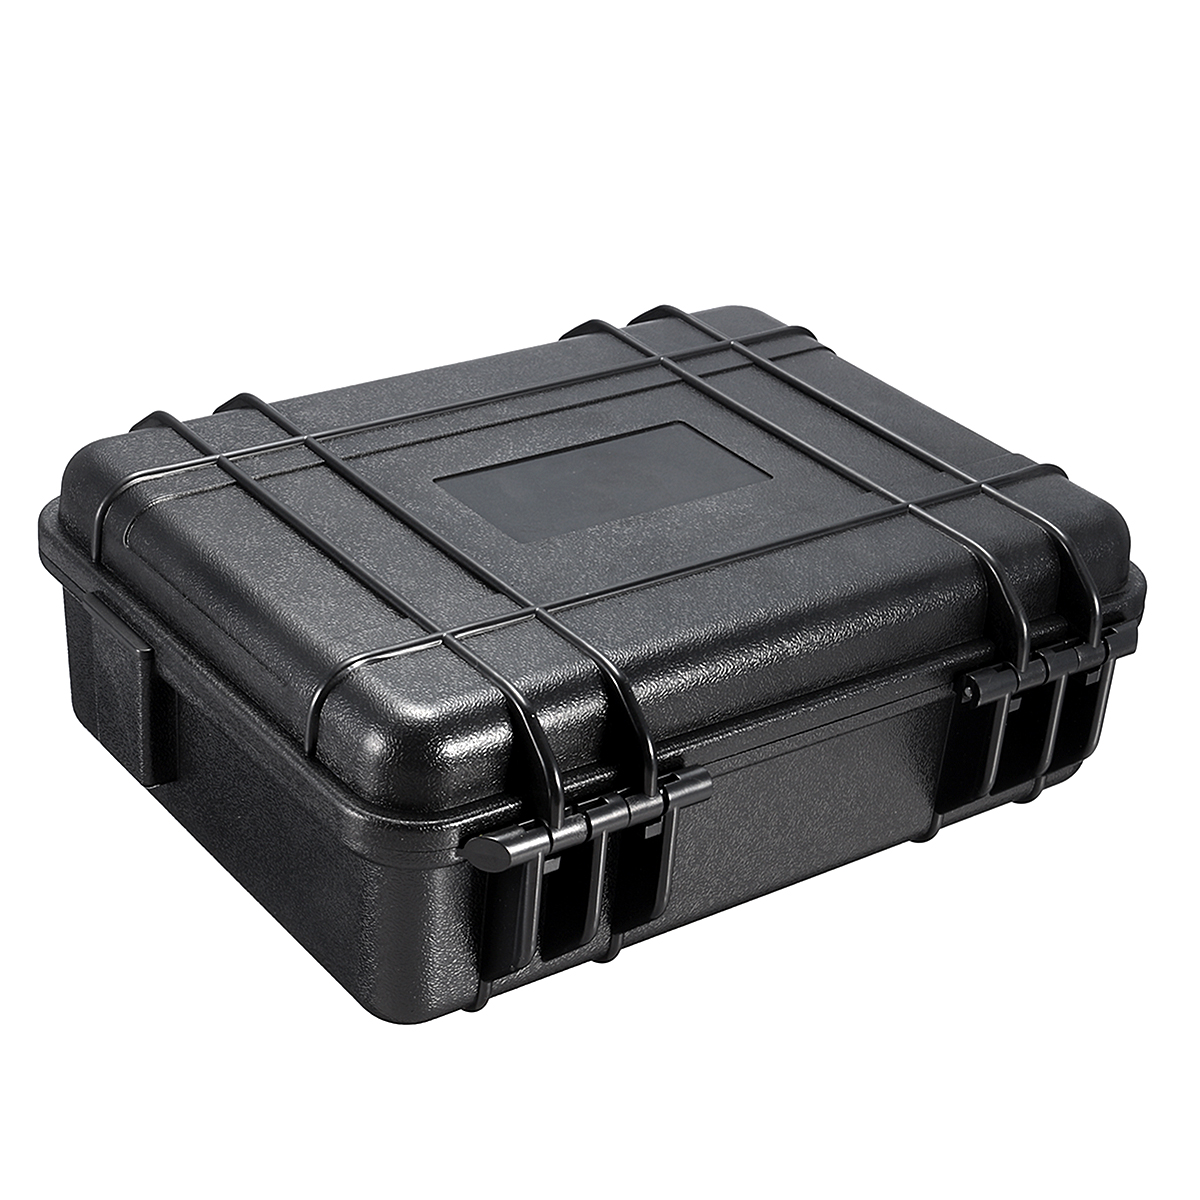 Waterproof-Hard-Carry-Tool-Case-Bag-Storage-Box-Camera-Photography-with-Sponge-18012050mm-1661734-4